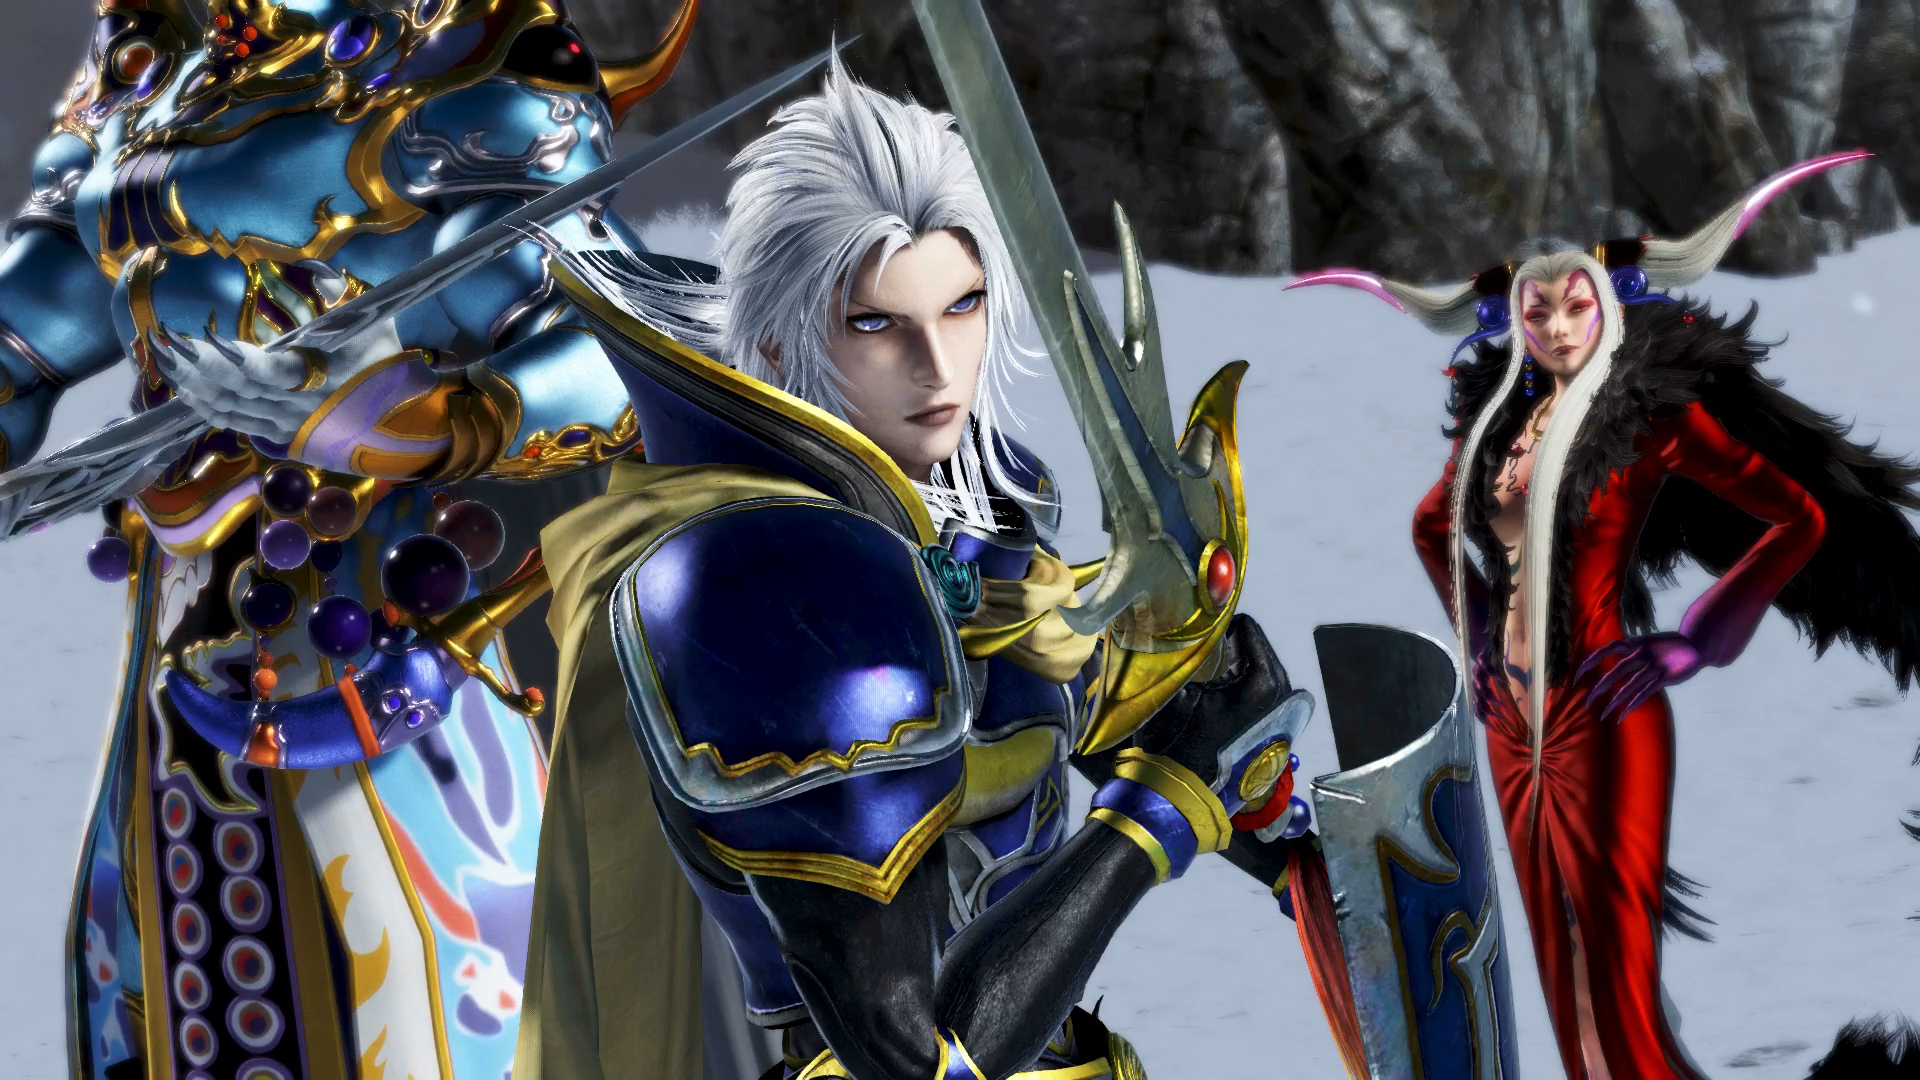 In Dissidia Final Fantasy NT‘s newest update, you’ll be able to take on Mis...